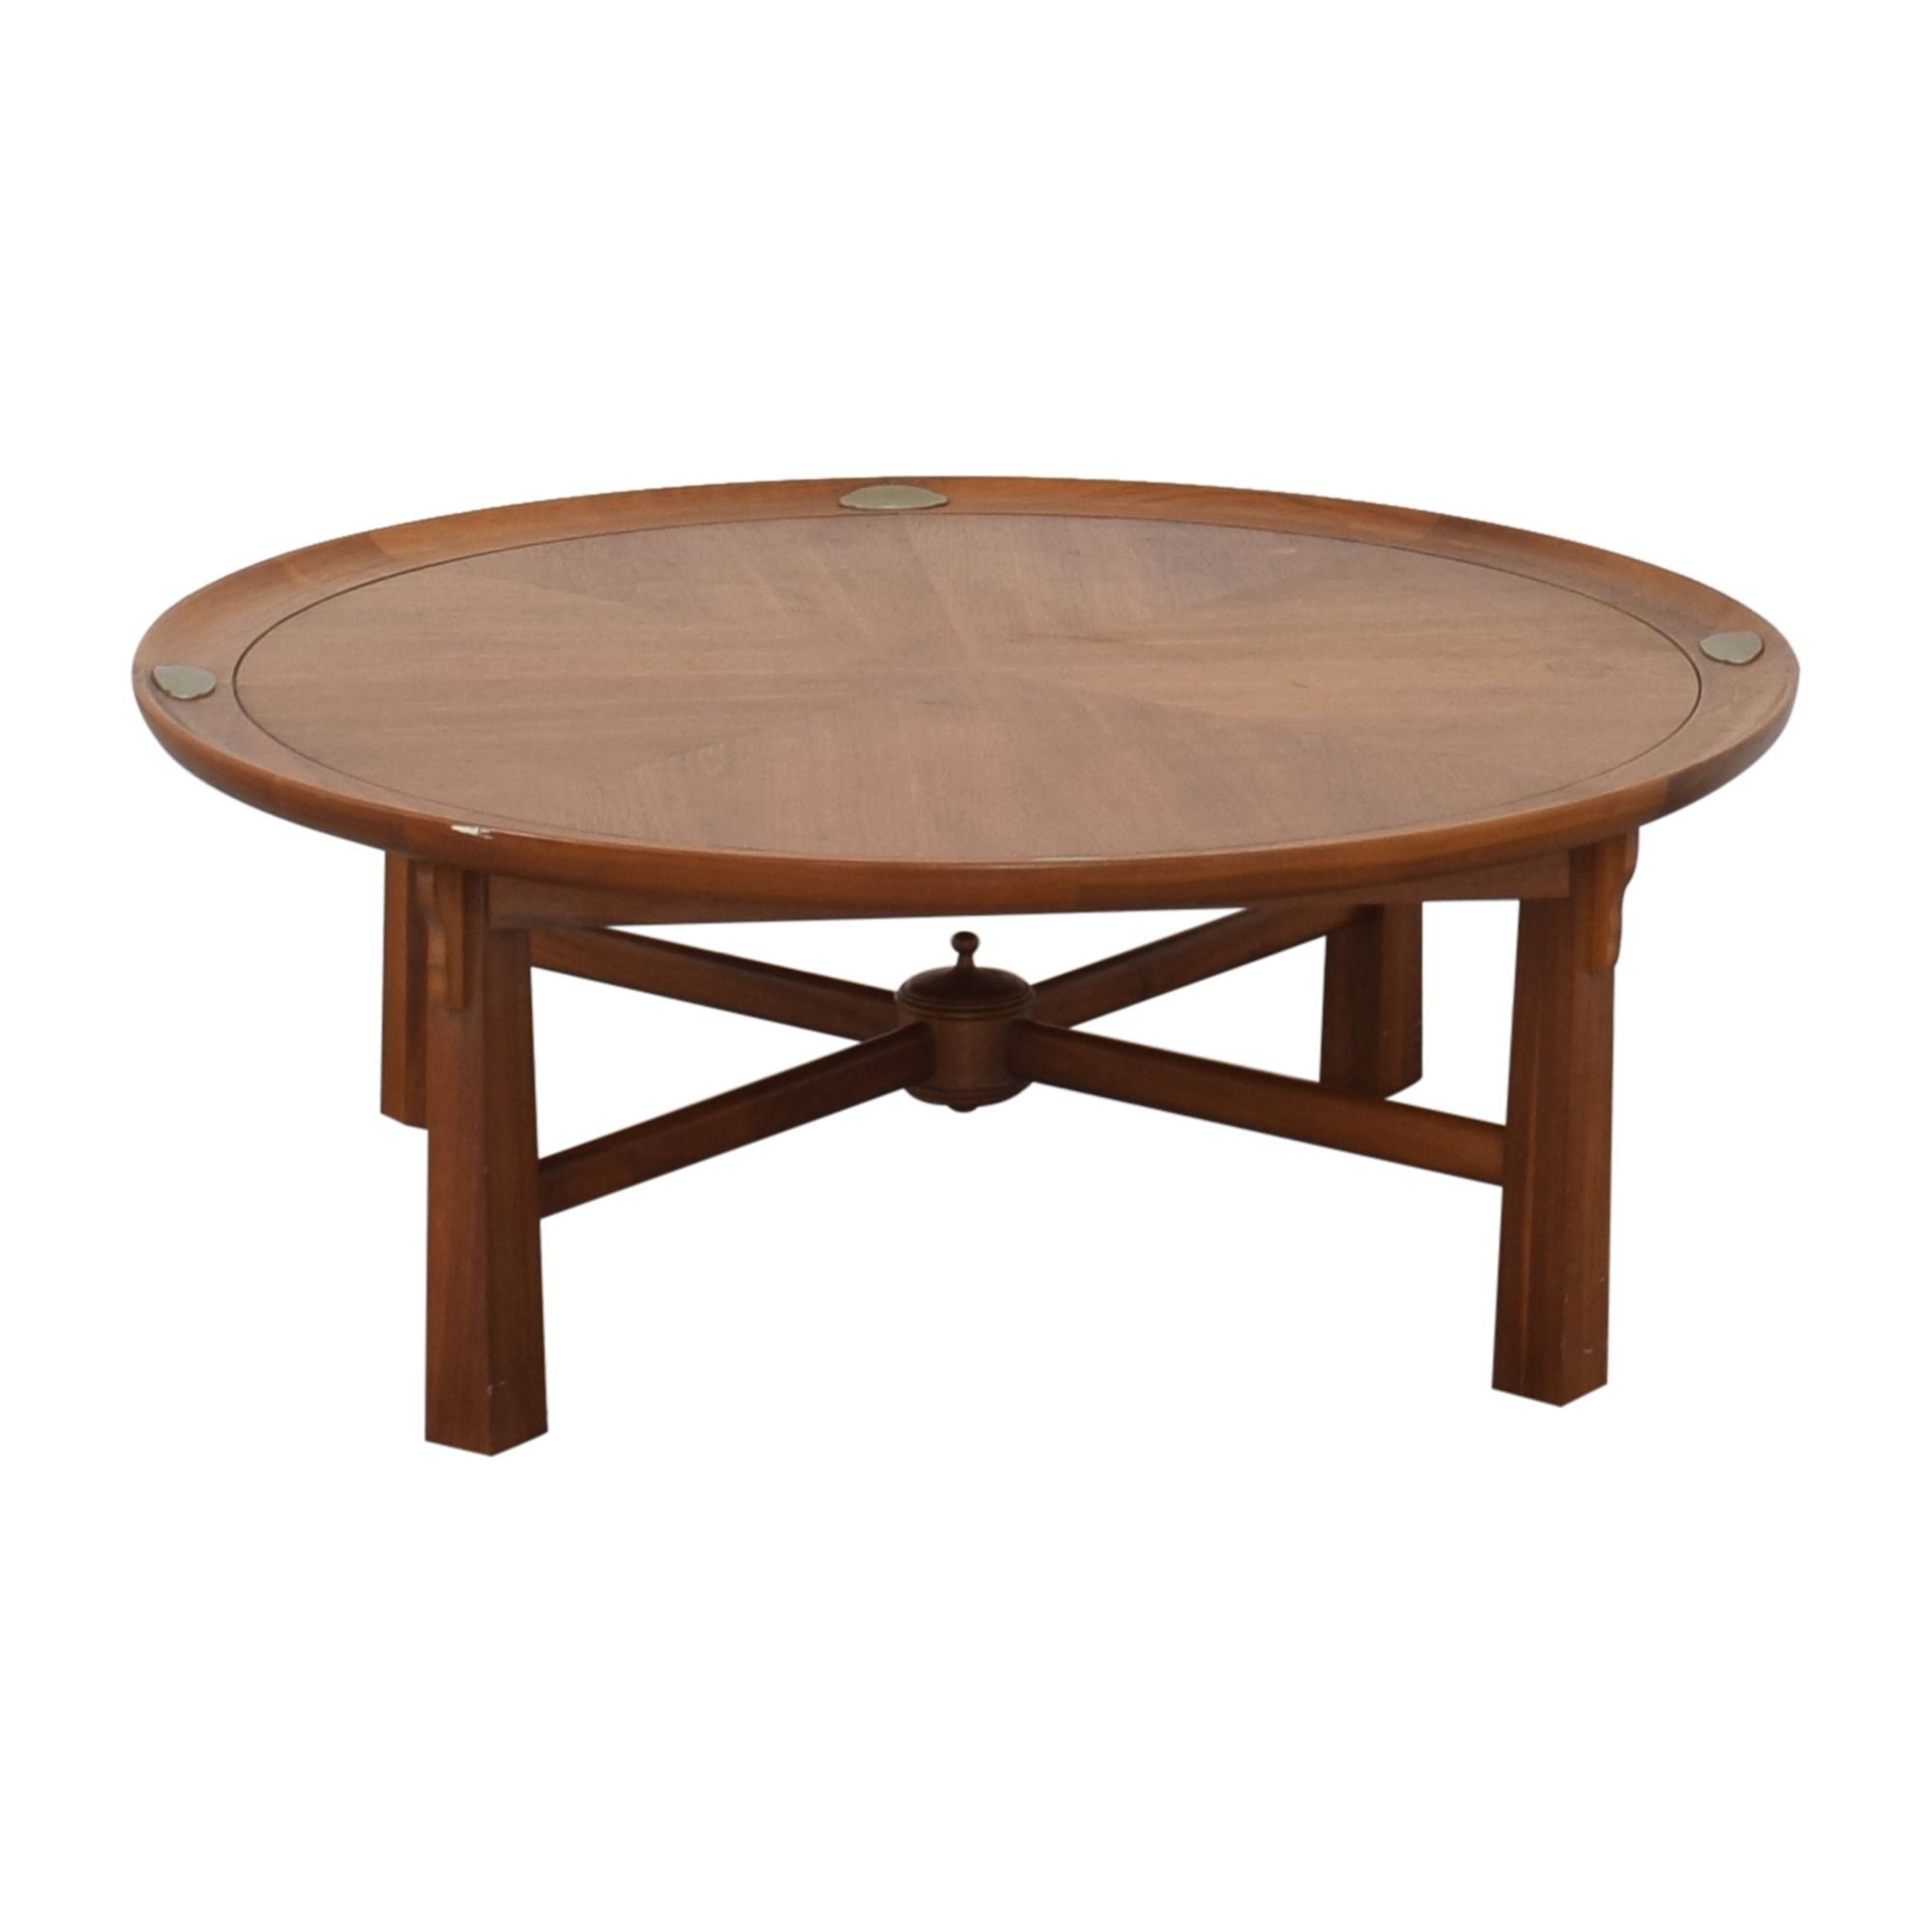 [%72% Off – Heritage Henredon Heritage Henredon Round Coffee Table / Tables In Latest American Heritage Round Coffee Tables|american Heritage Round Coffee Tables Pertaining To Well Liked 72% Off – Heritage Henredon Heritage Henredon Round Coffee Table / Tables|most Current American Heritage Round Coffee Tables Regarding 72% Off – Heritage Henredon Heritage Henredon Round Coffee Table / Tables|fashionable 72% Off – Heritage Henredon Heritage Henredon Round Coffee Table / Tables With Regard To American Heritage Round Coffee Tables%] (View 9 of 15)